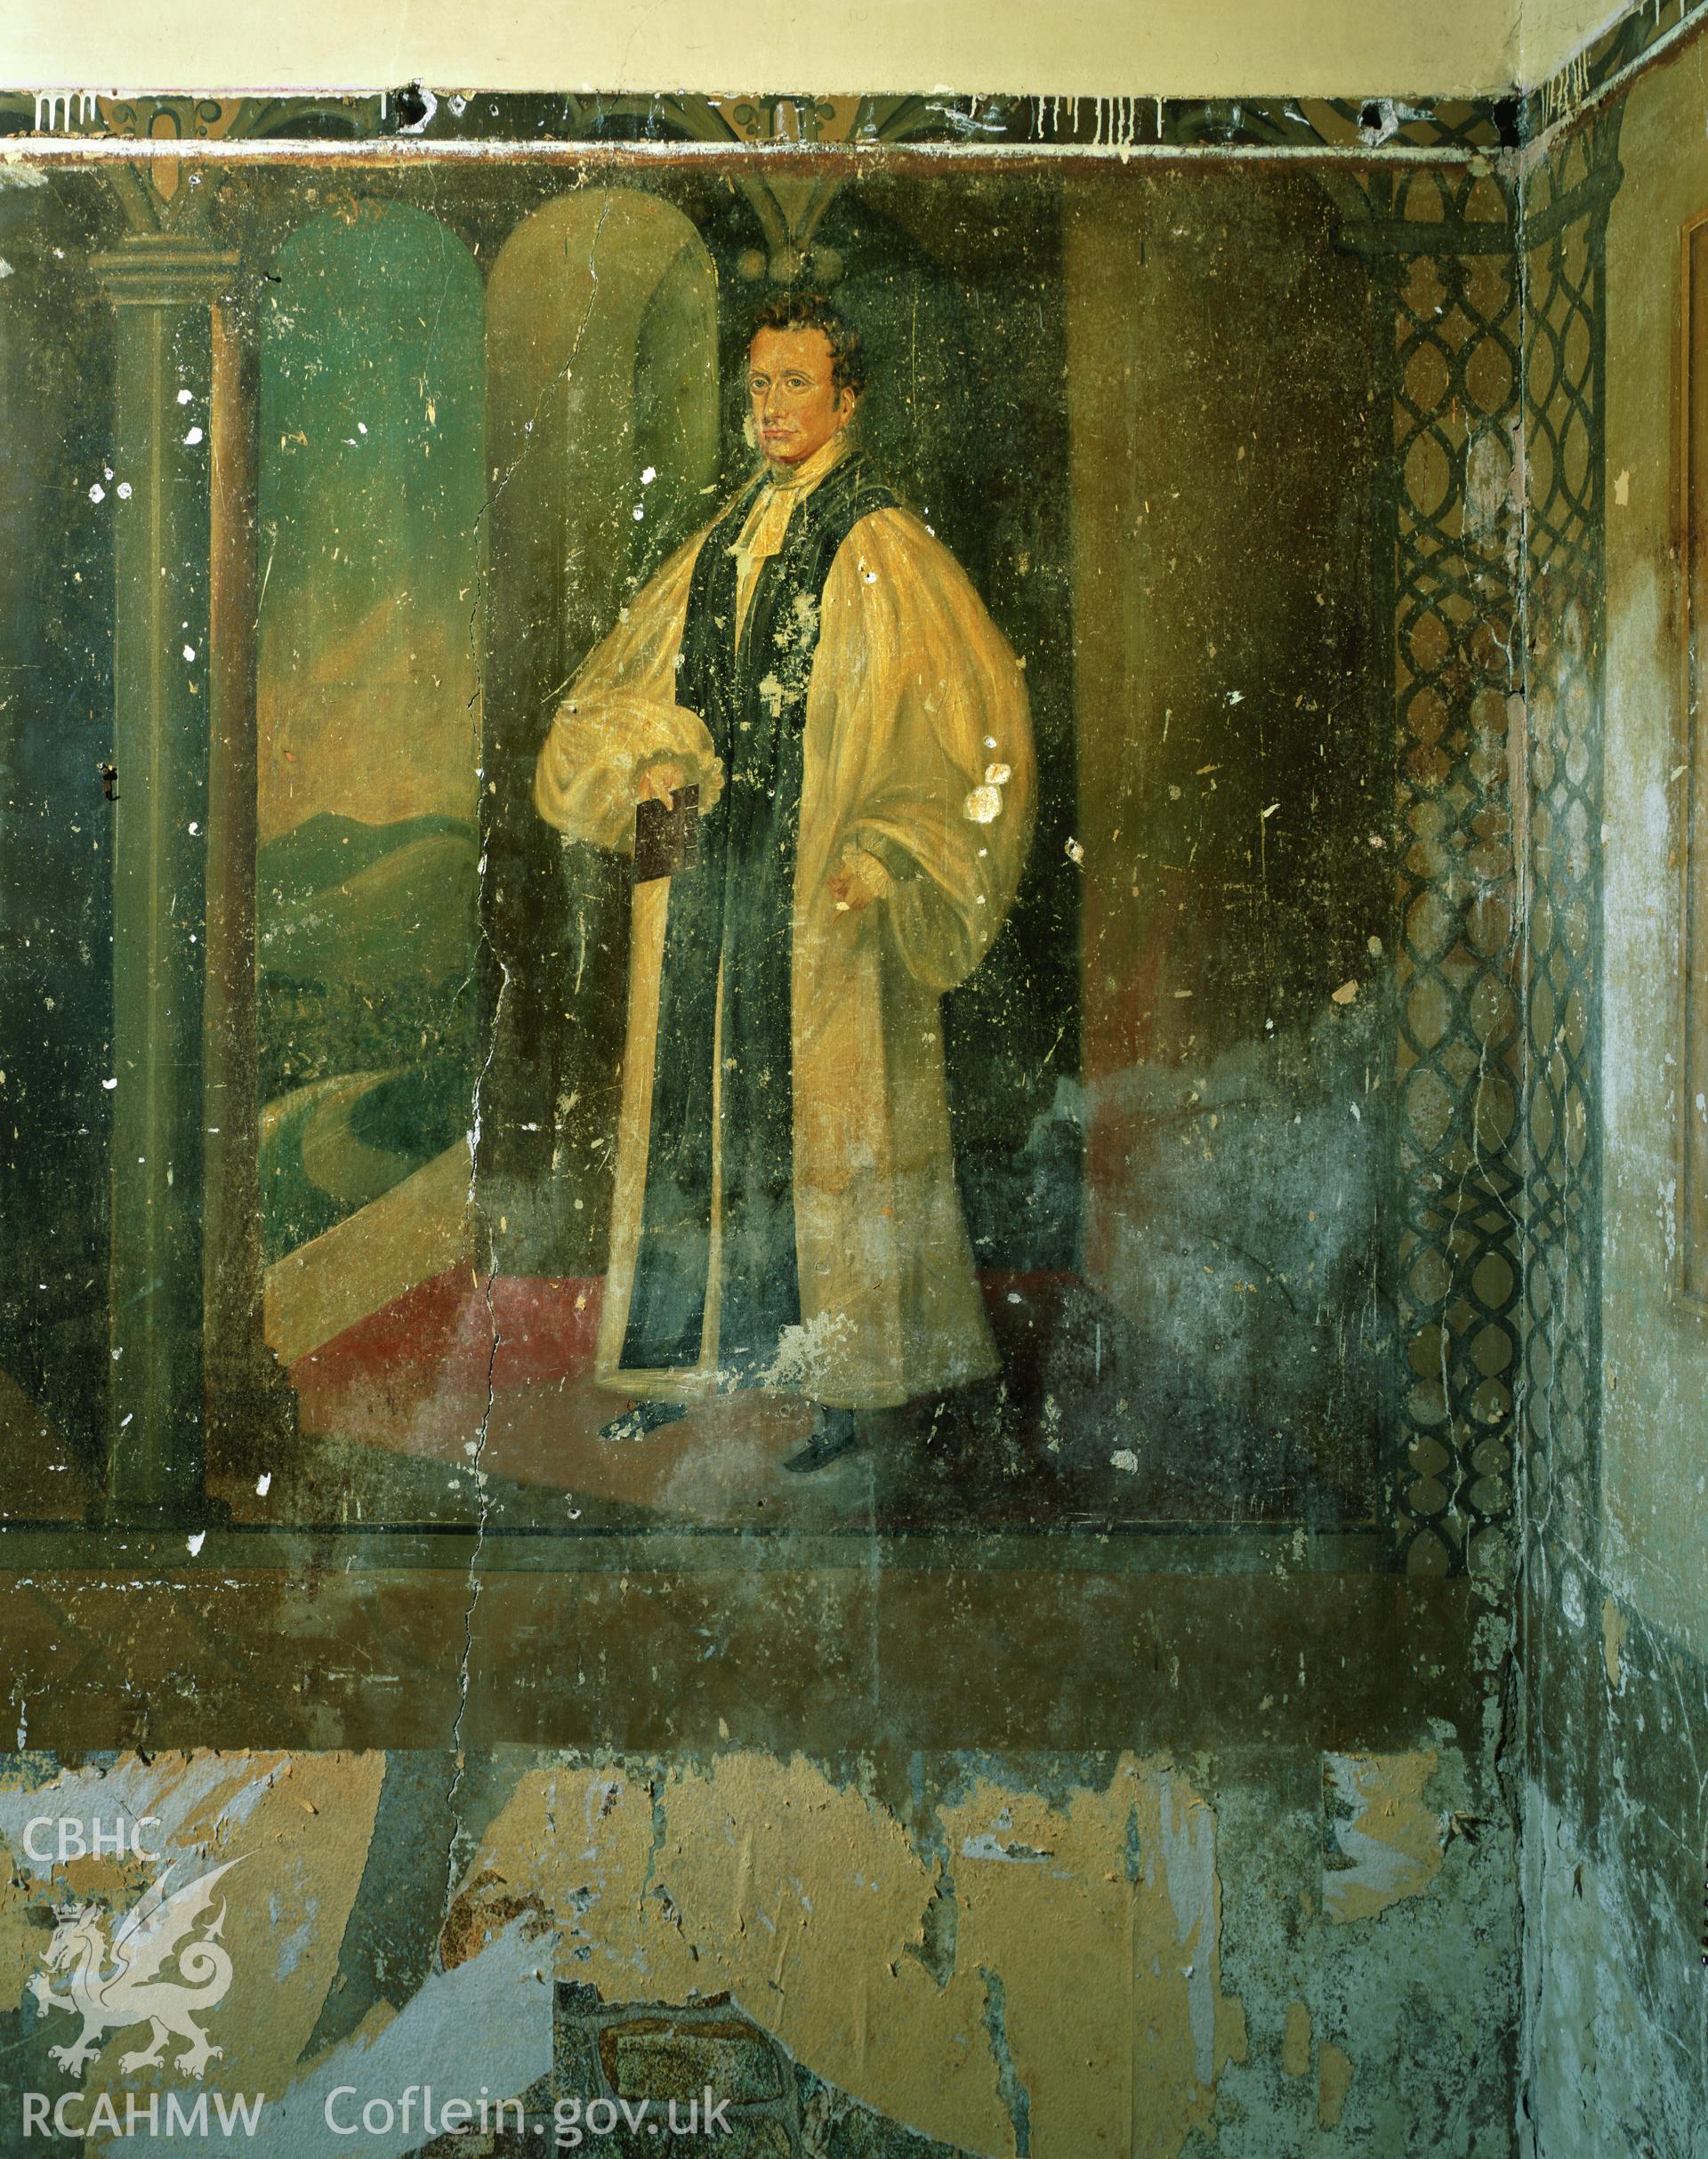 RCAHMW colour transparency showing the clergyman painting at Elwy Bank, St Asaph, photographed by Iain Wright, November 2003.